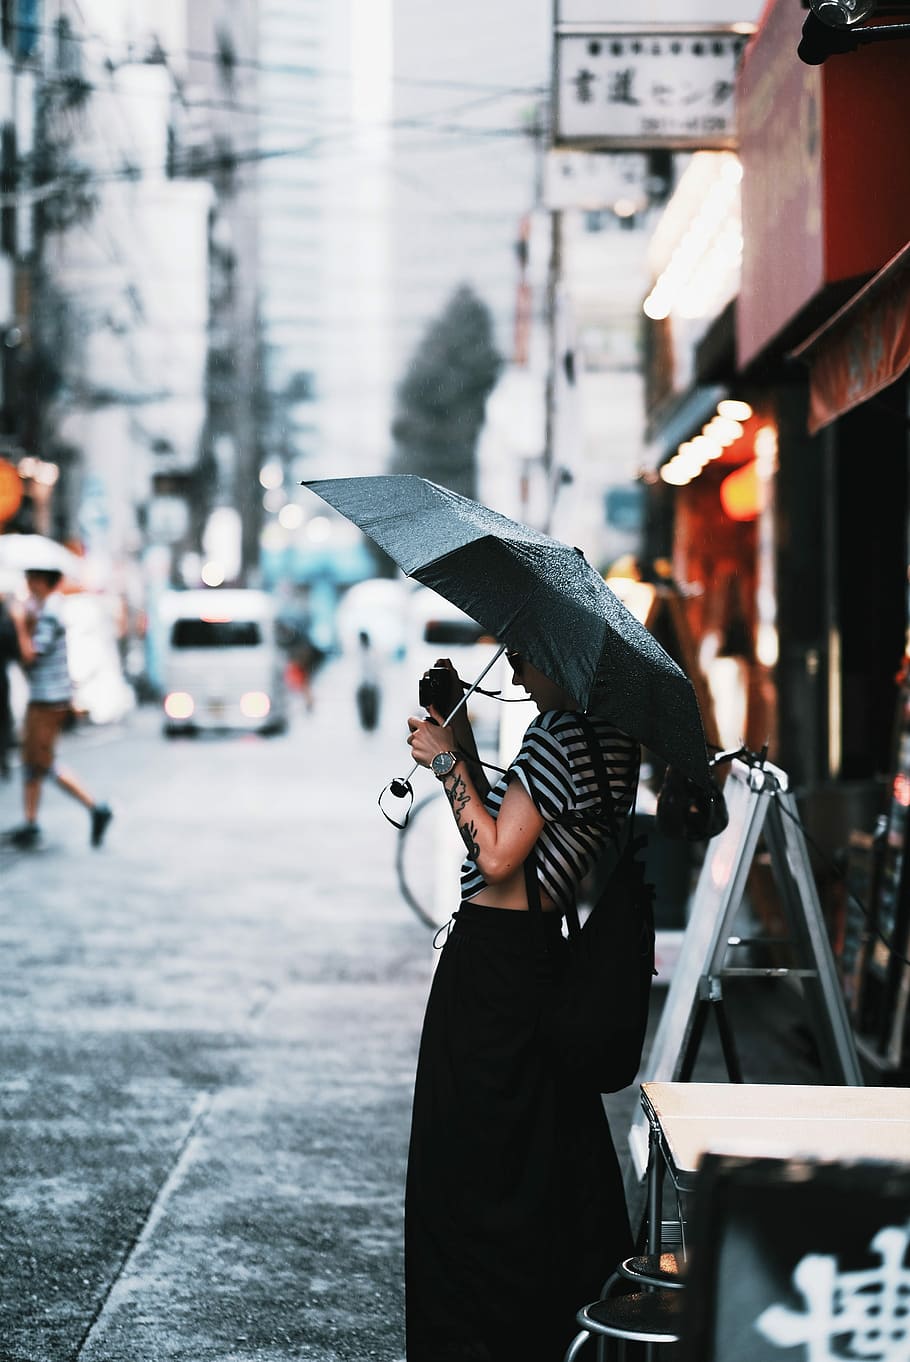 Japan 2017, woman holding umbrella and point-and-shoot camera while standing beside table and signage in street during daytime